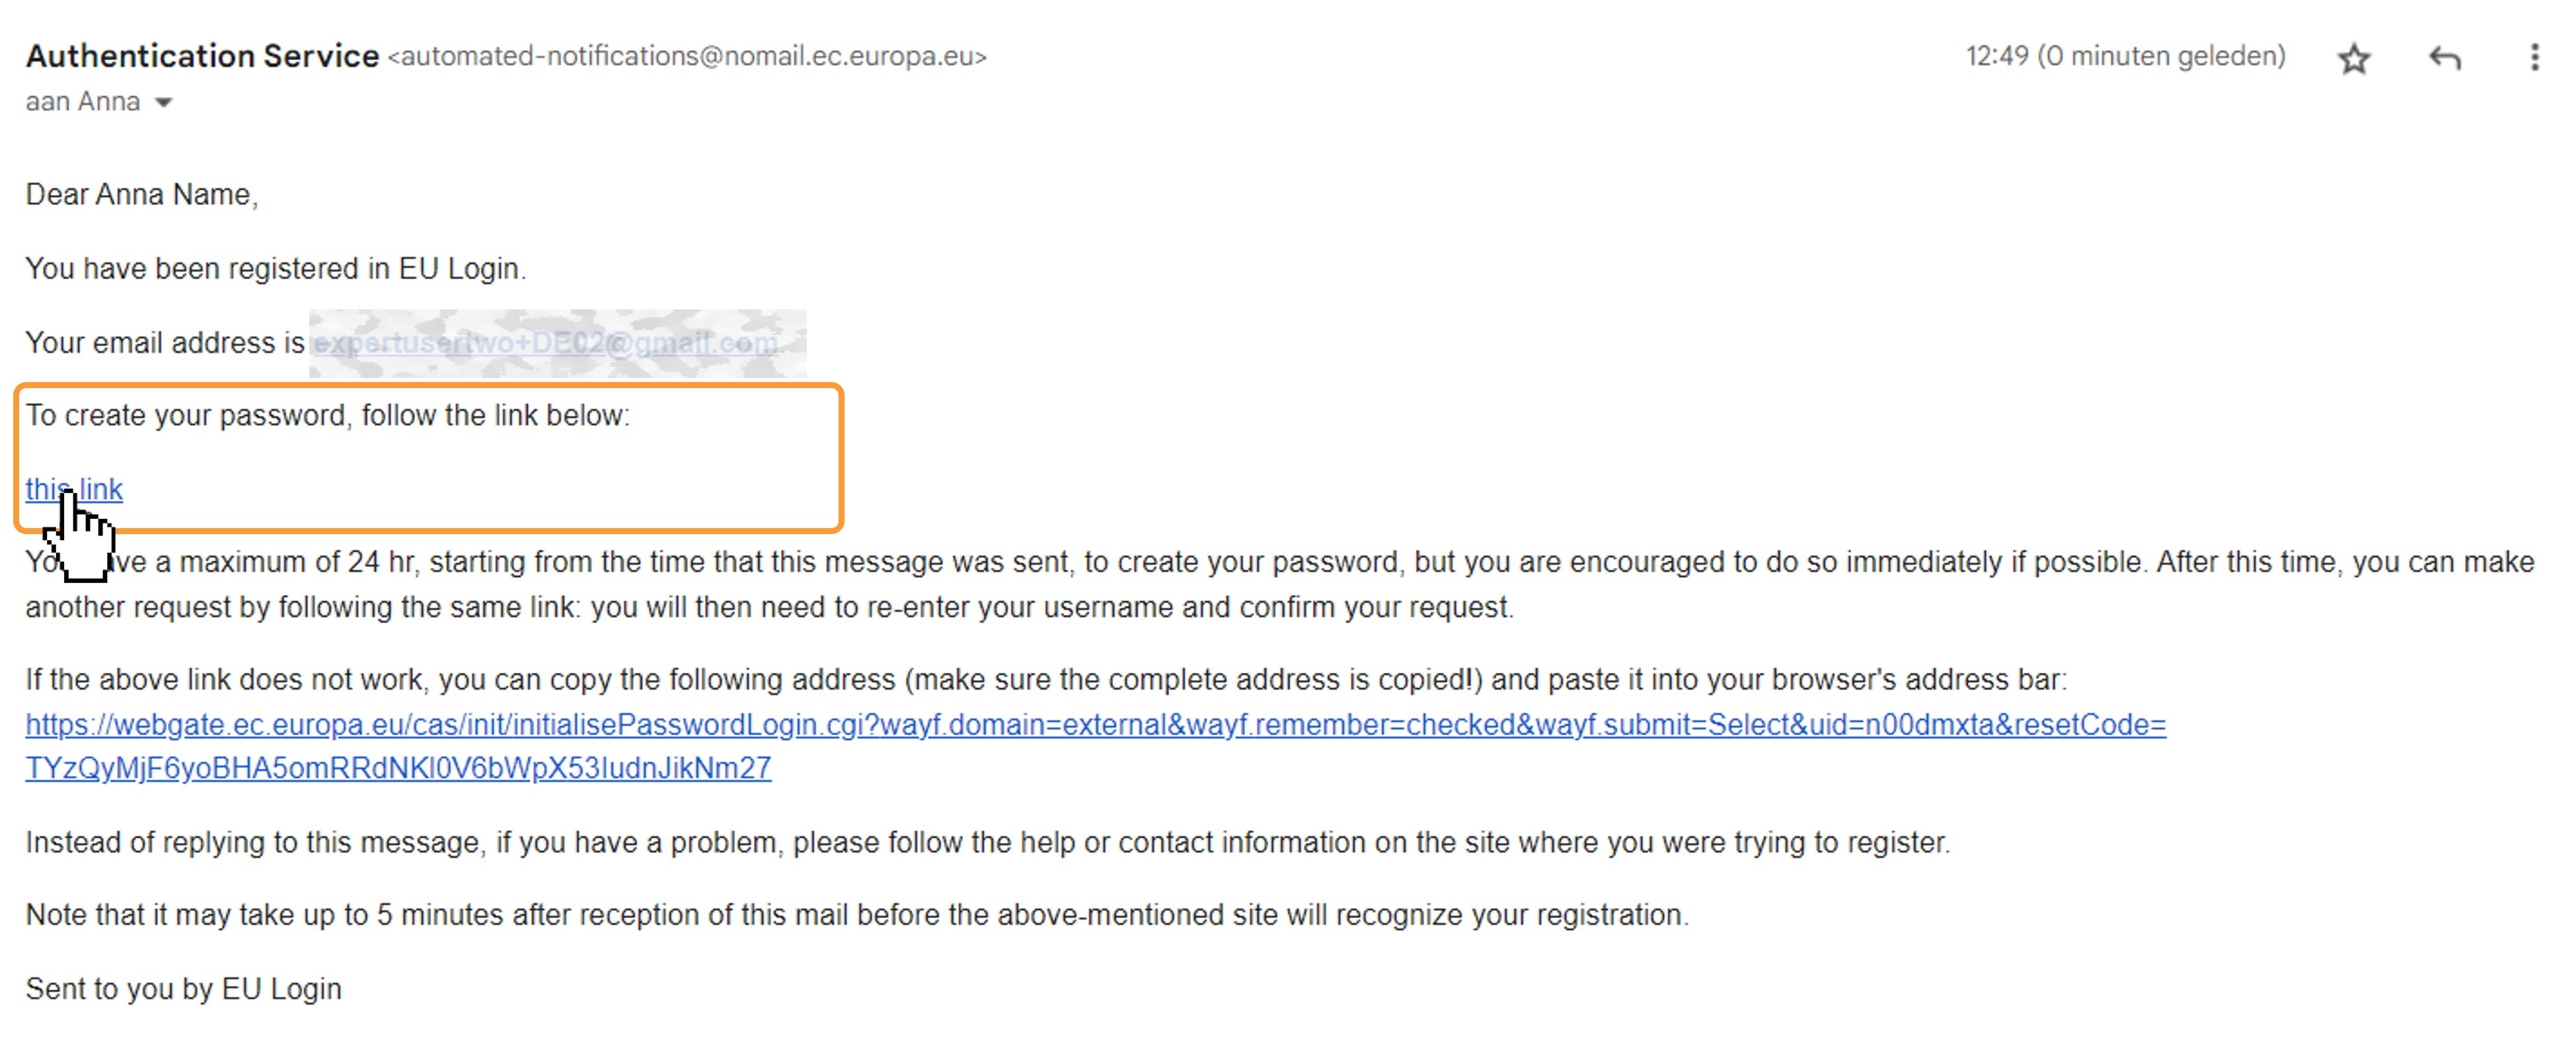 Account password email is sent to your mailbox with link to create the password